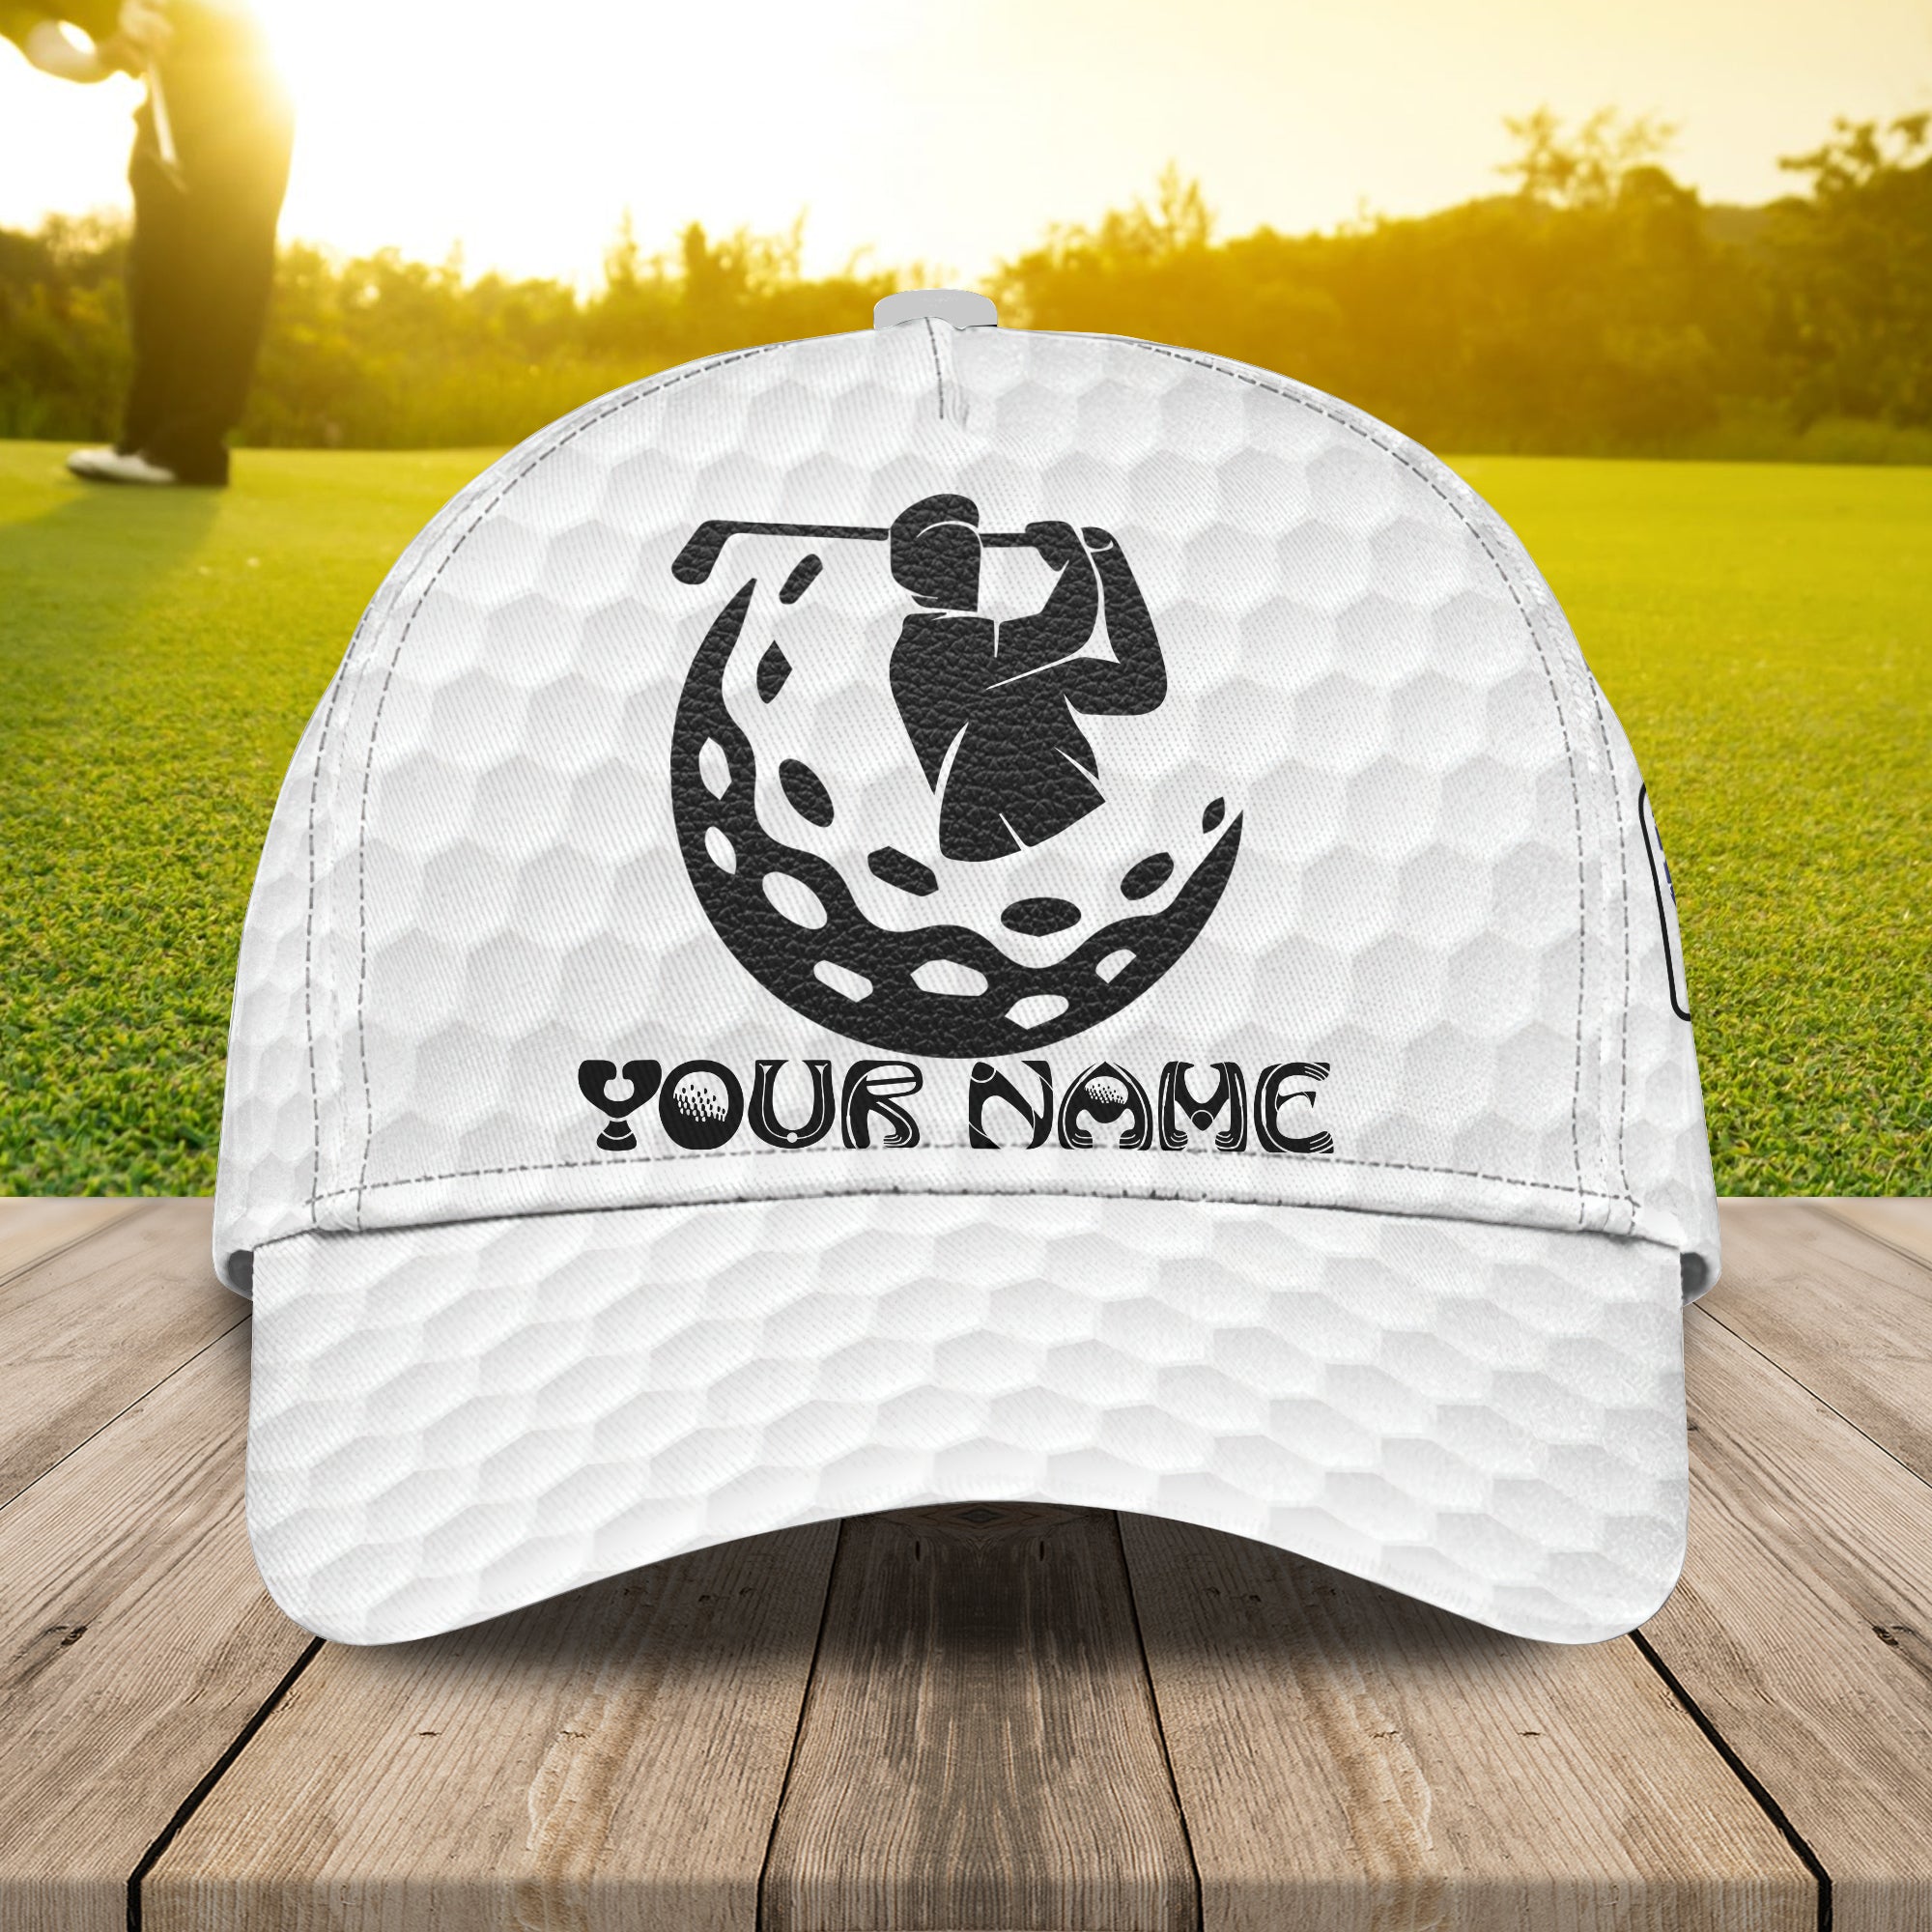 Golf - Personalized Name Cap - Nmd